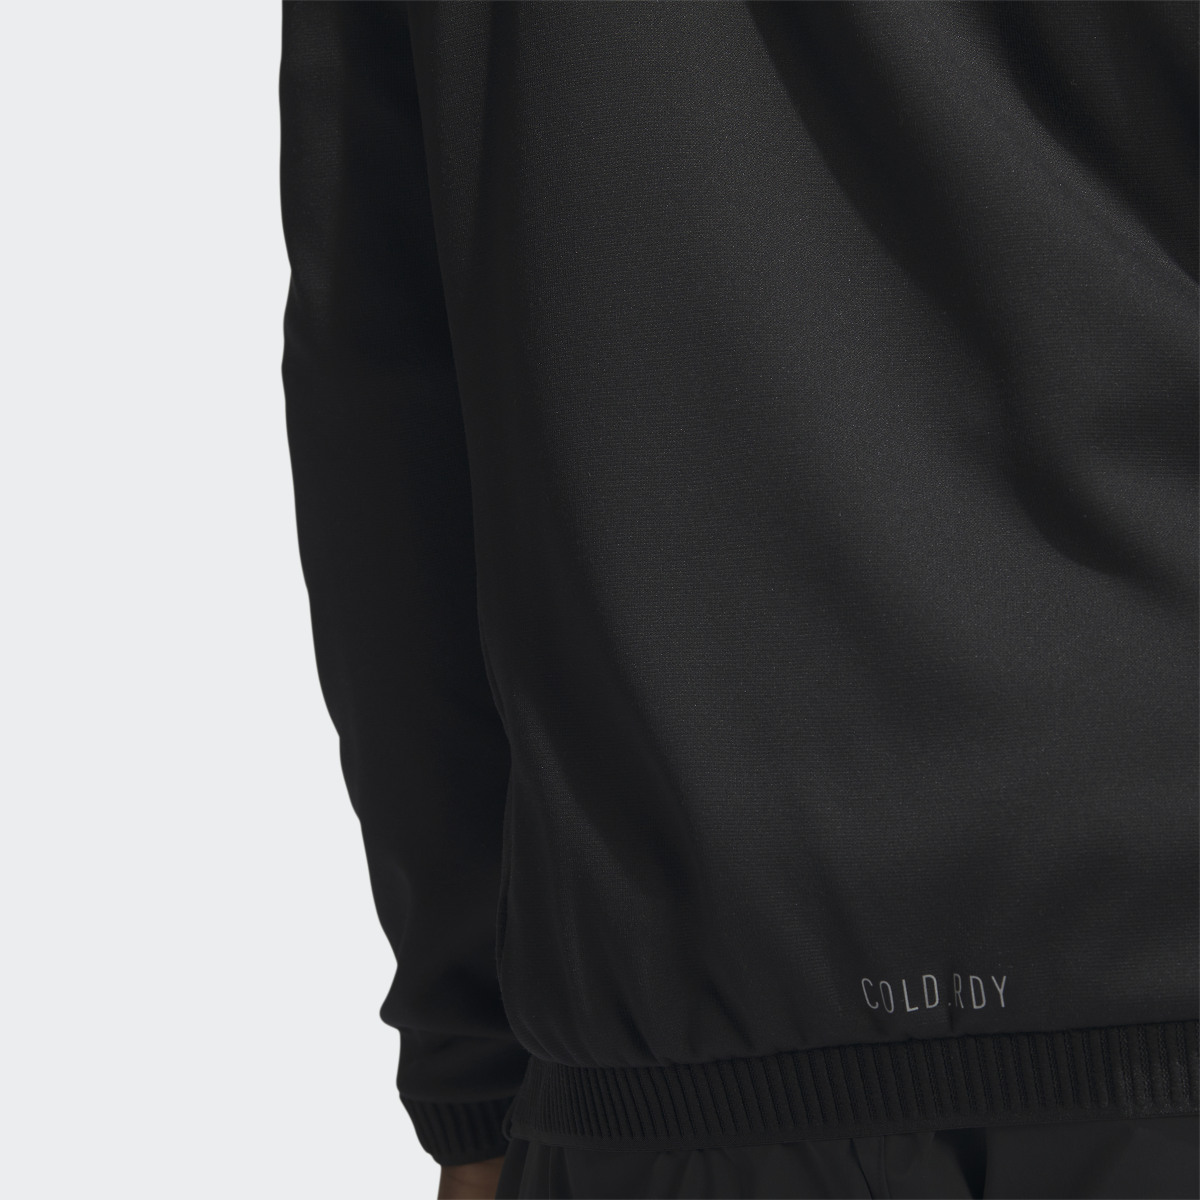 Adidas COLD.RDY Full-Zip Jacket. 8